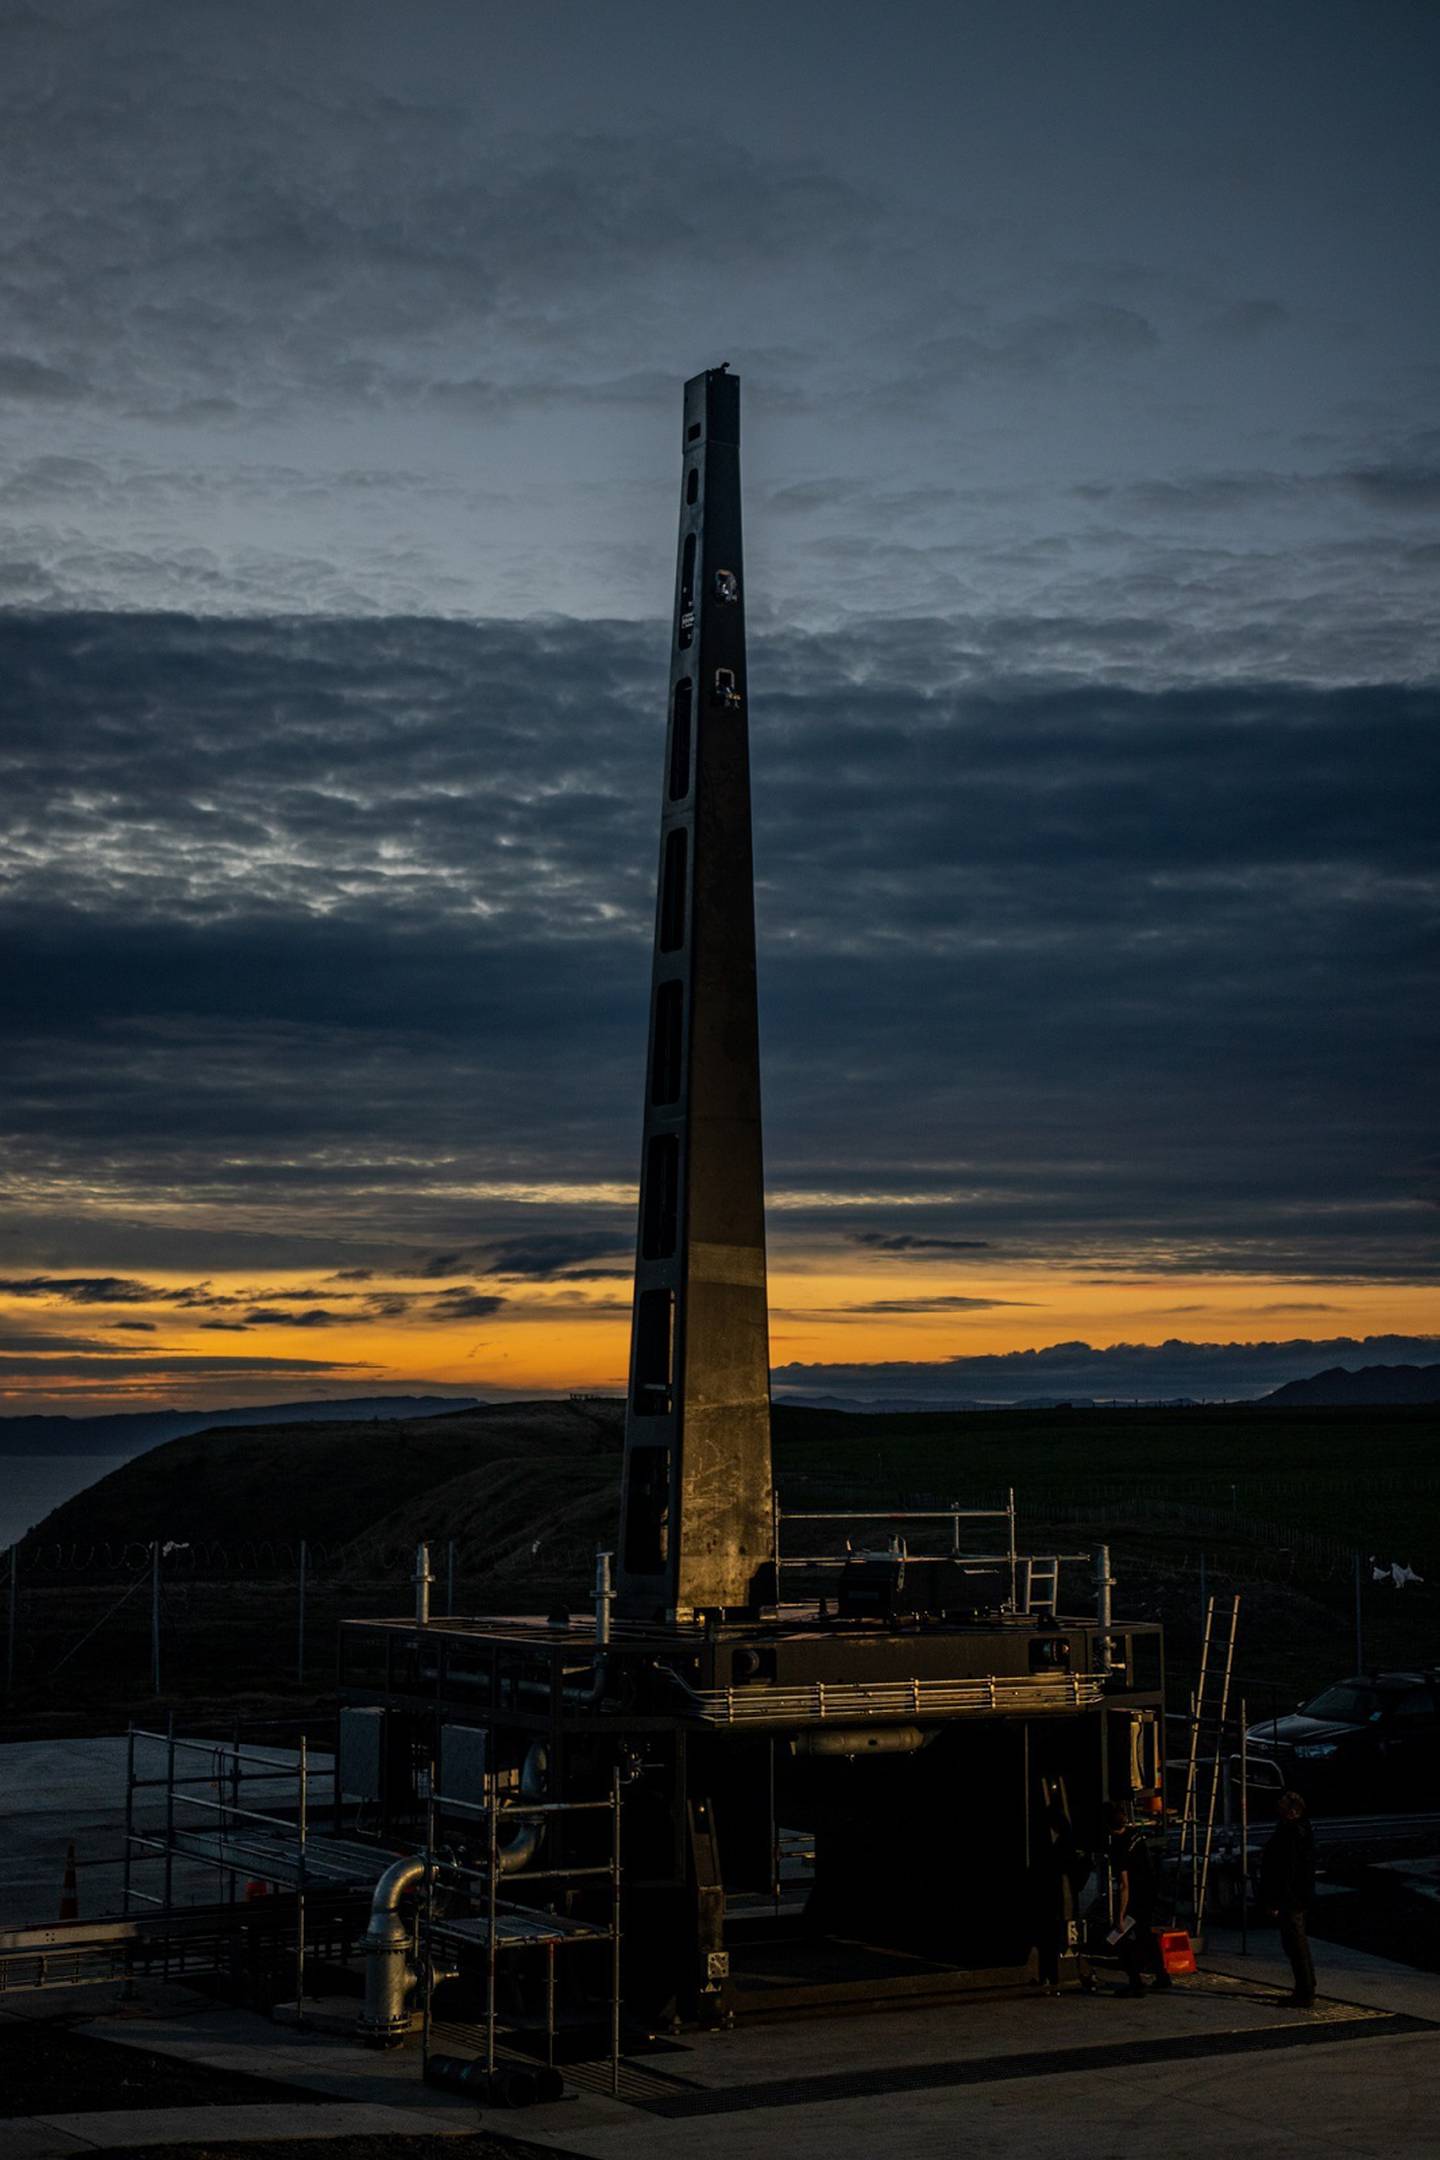 About 40 tonnes of steel have been used in the development of the launch mount structure. Photo / Rocket Lab